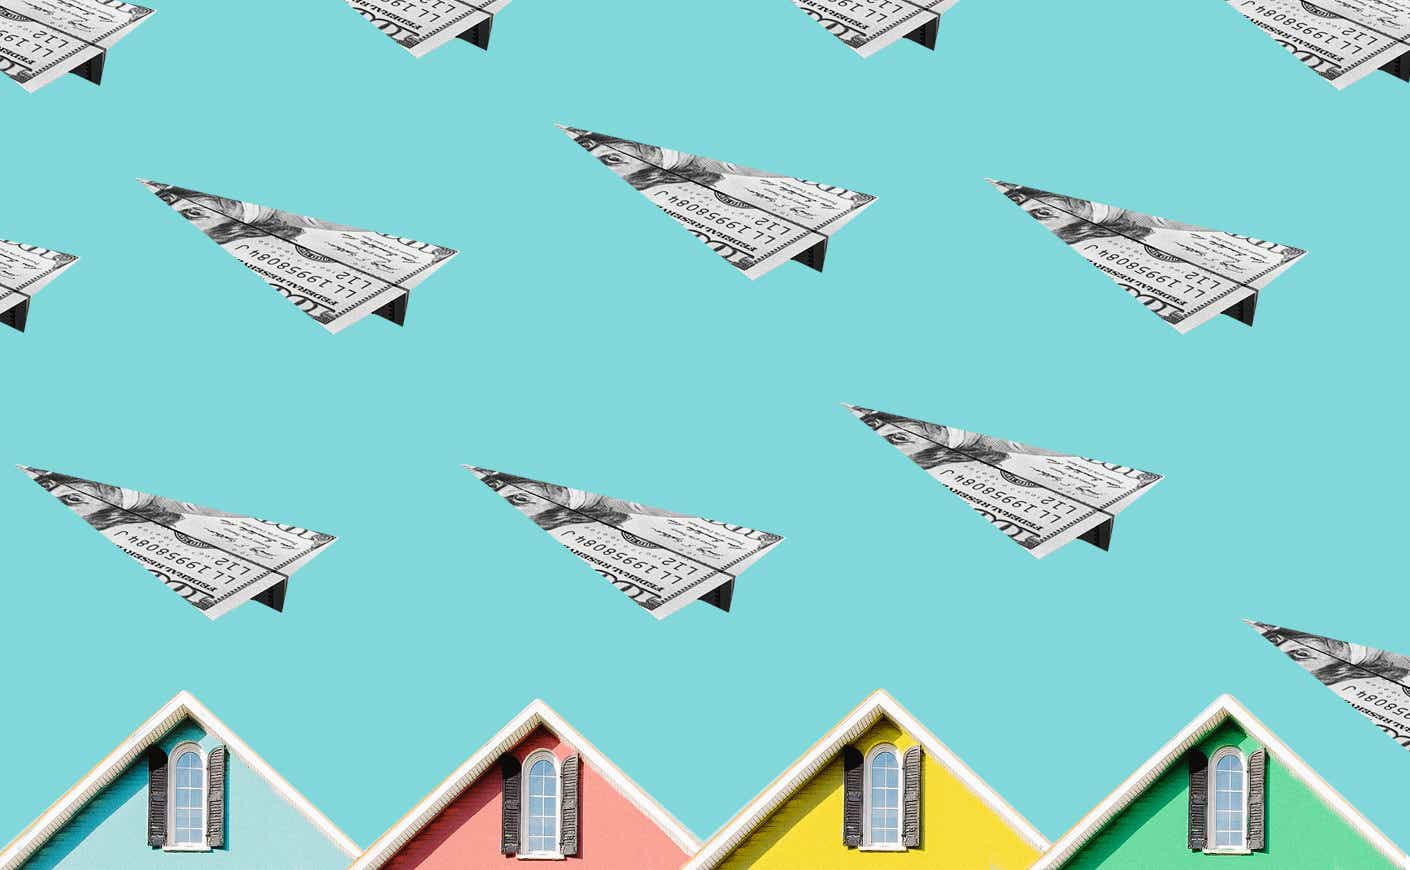 paper airplanes made of dollars flying over houses